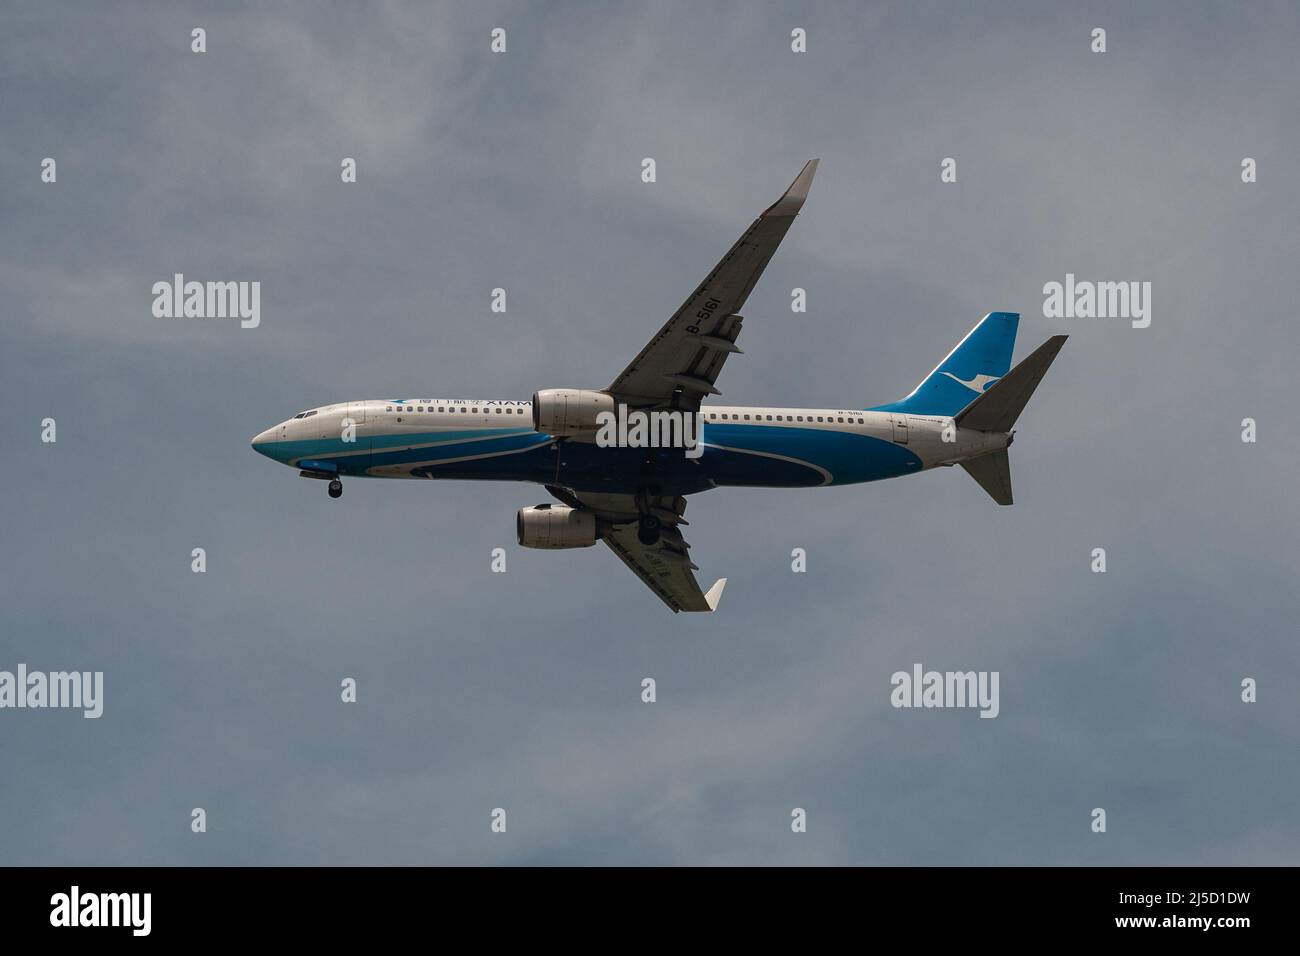 May 01, 2021, Singapore, Republic of Singapore, Asia - A Xiamen Air Boeing 737-800 passenger aircraft with registration B-5161 on approach to Changi International Airport during the ongoing Corona crisis. [automated translation] Stock Photo